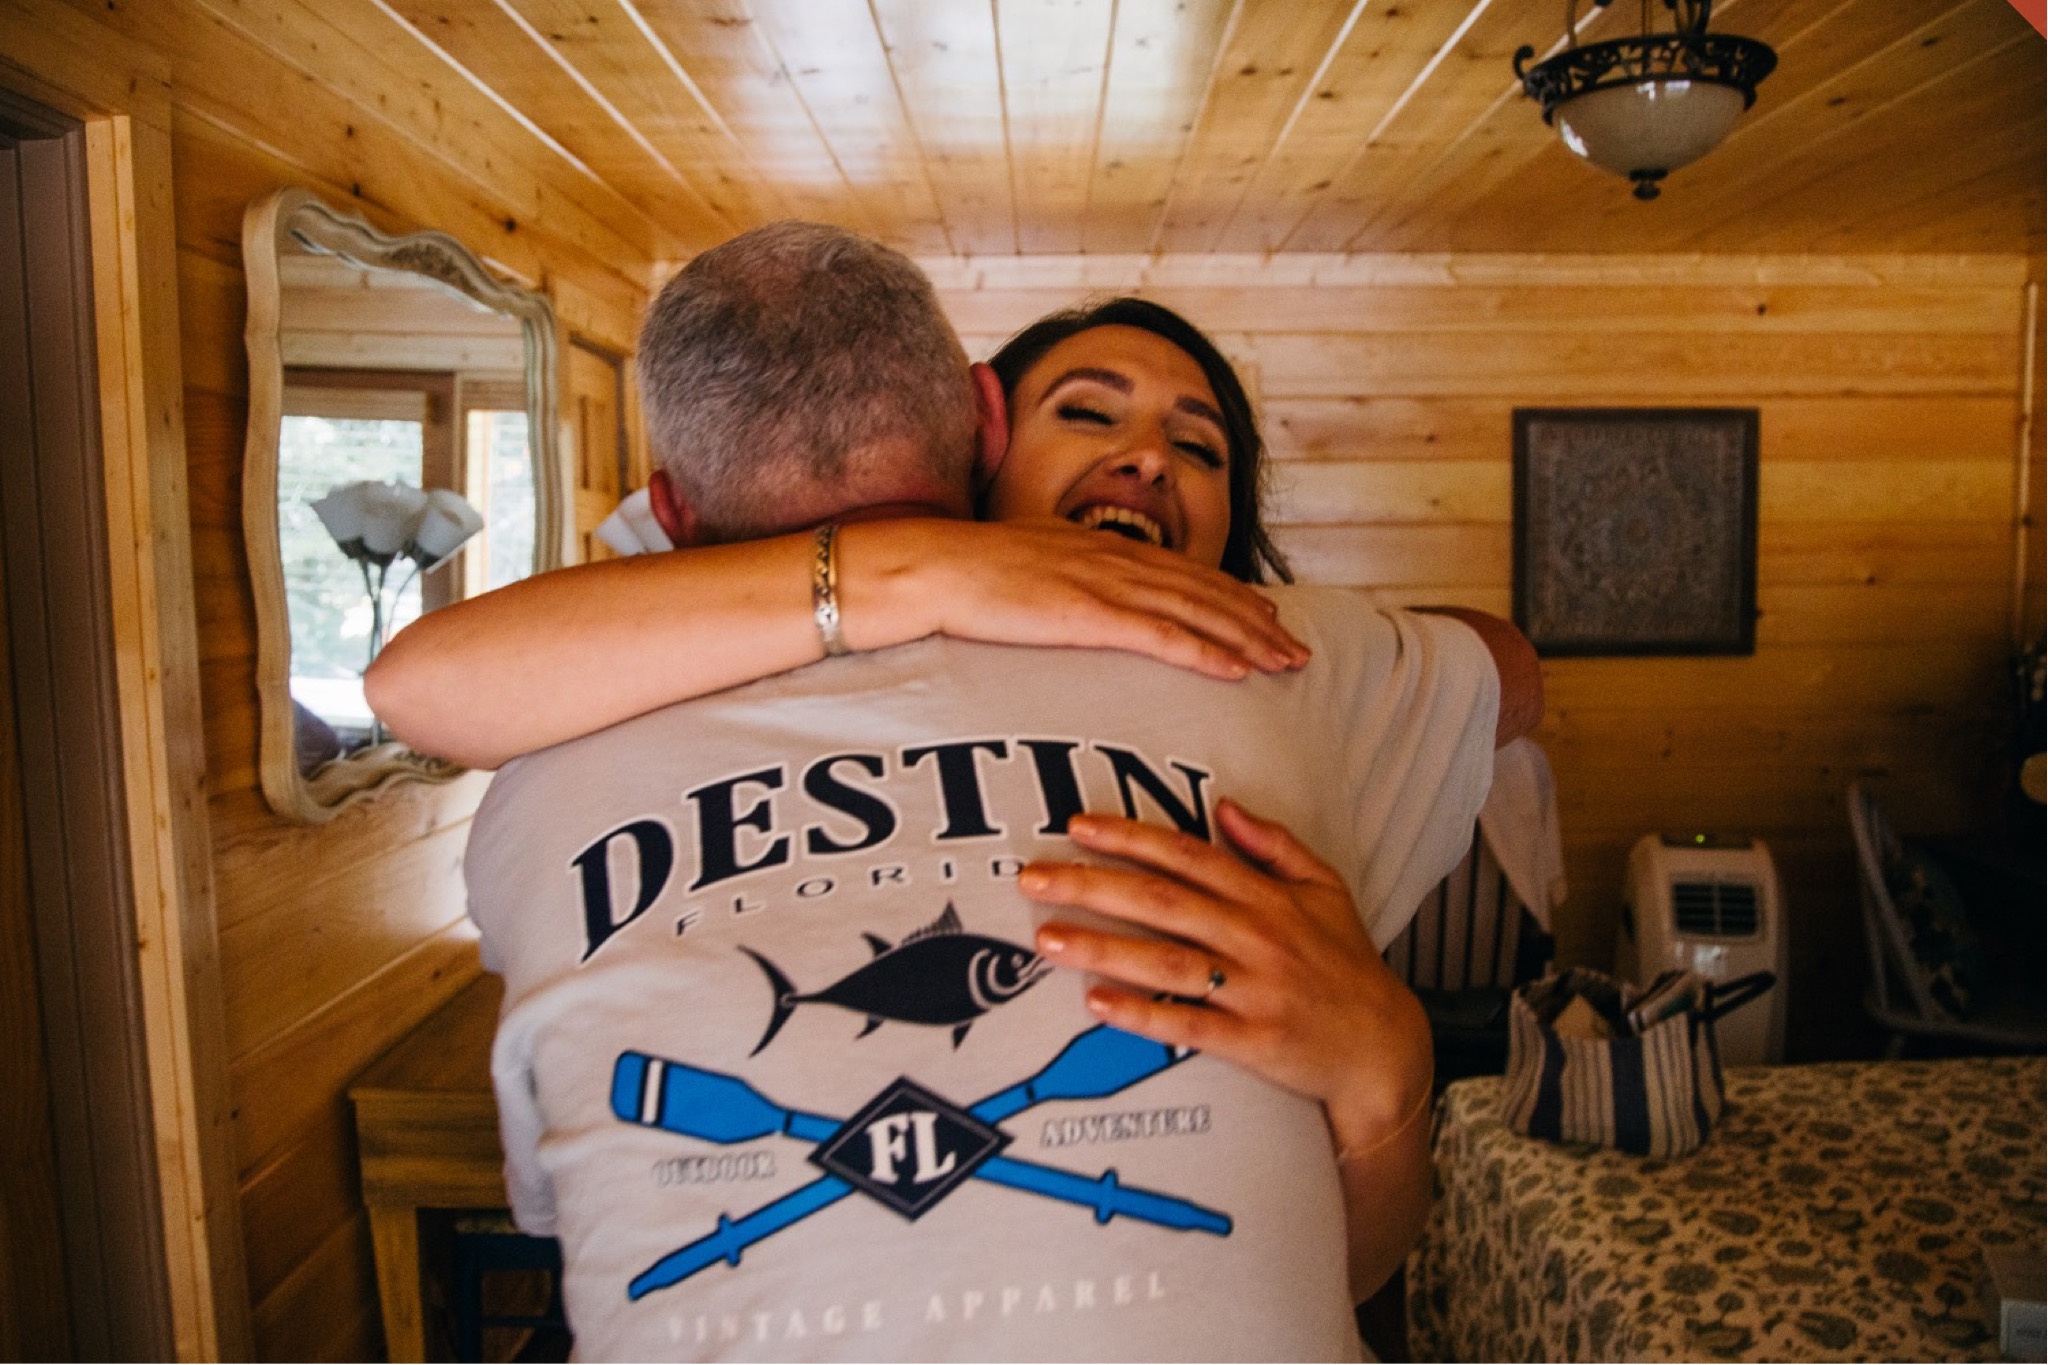 The bride and her father hug in her getting ready cabin.